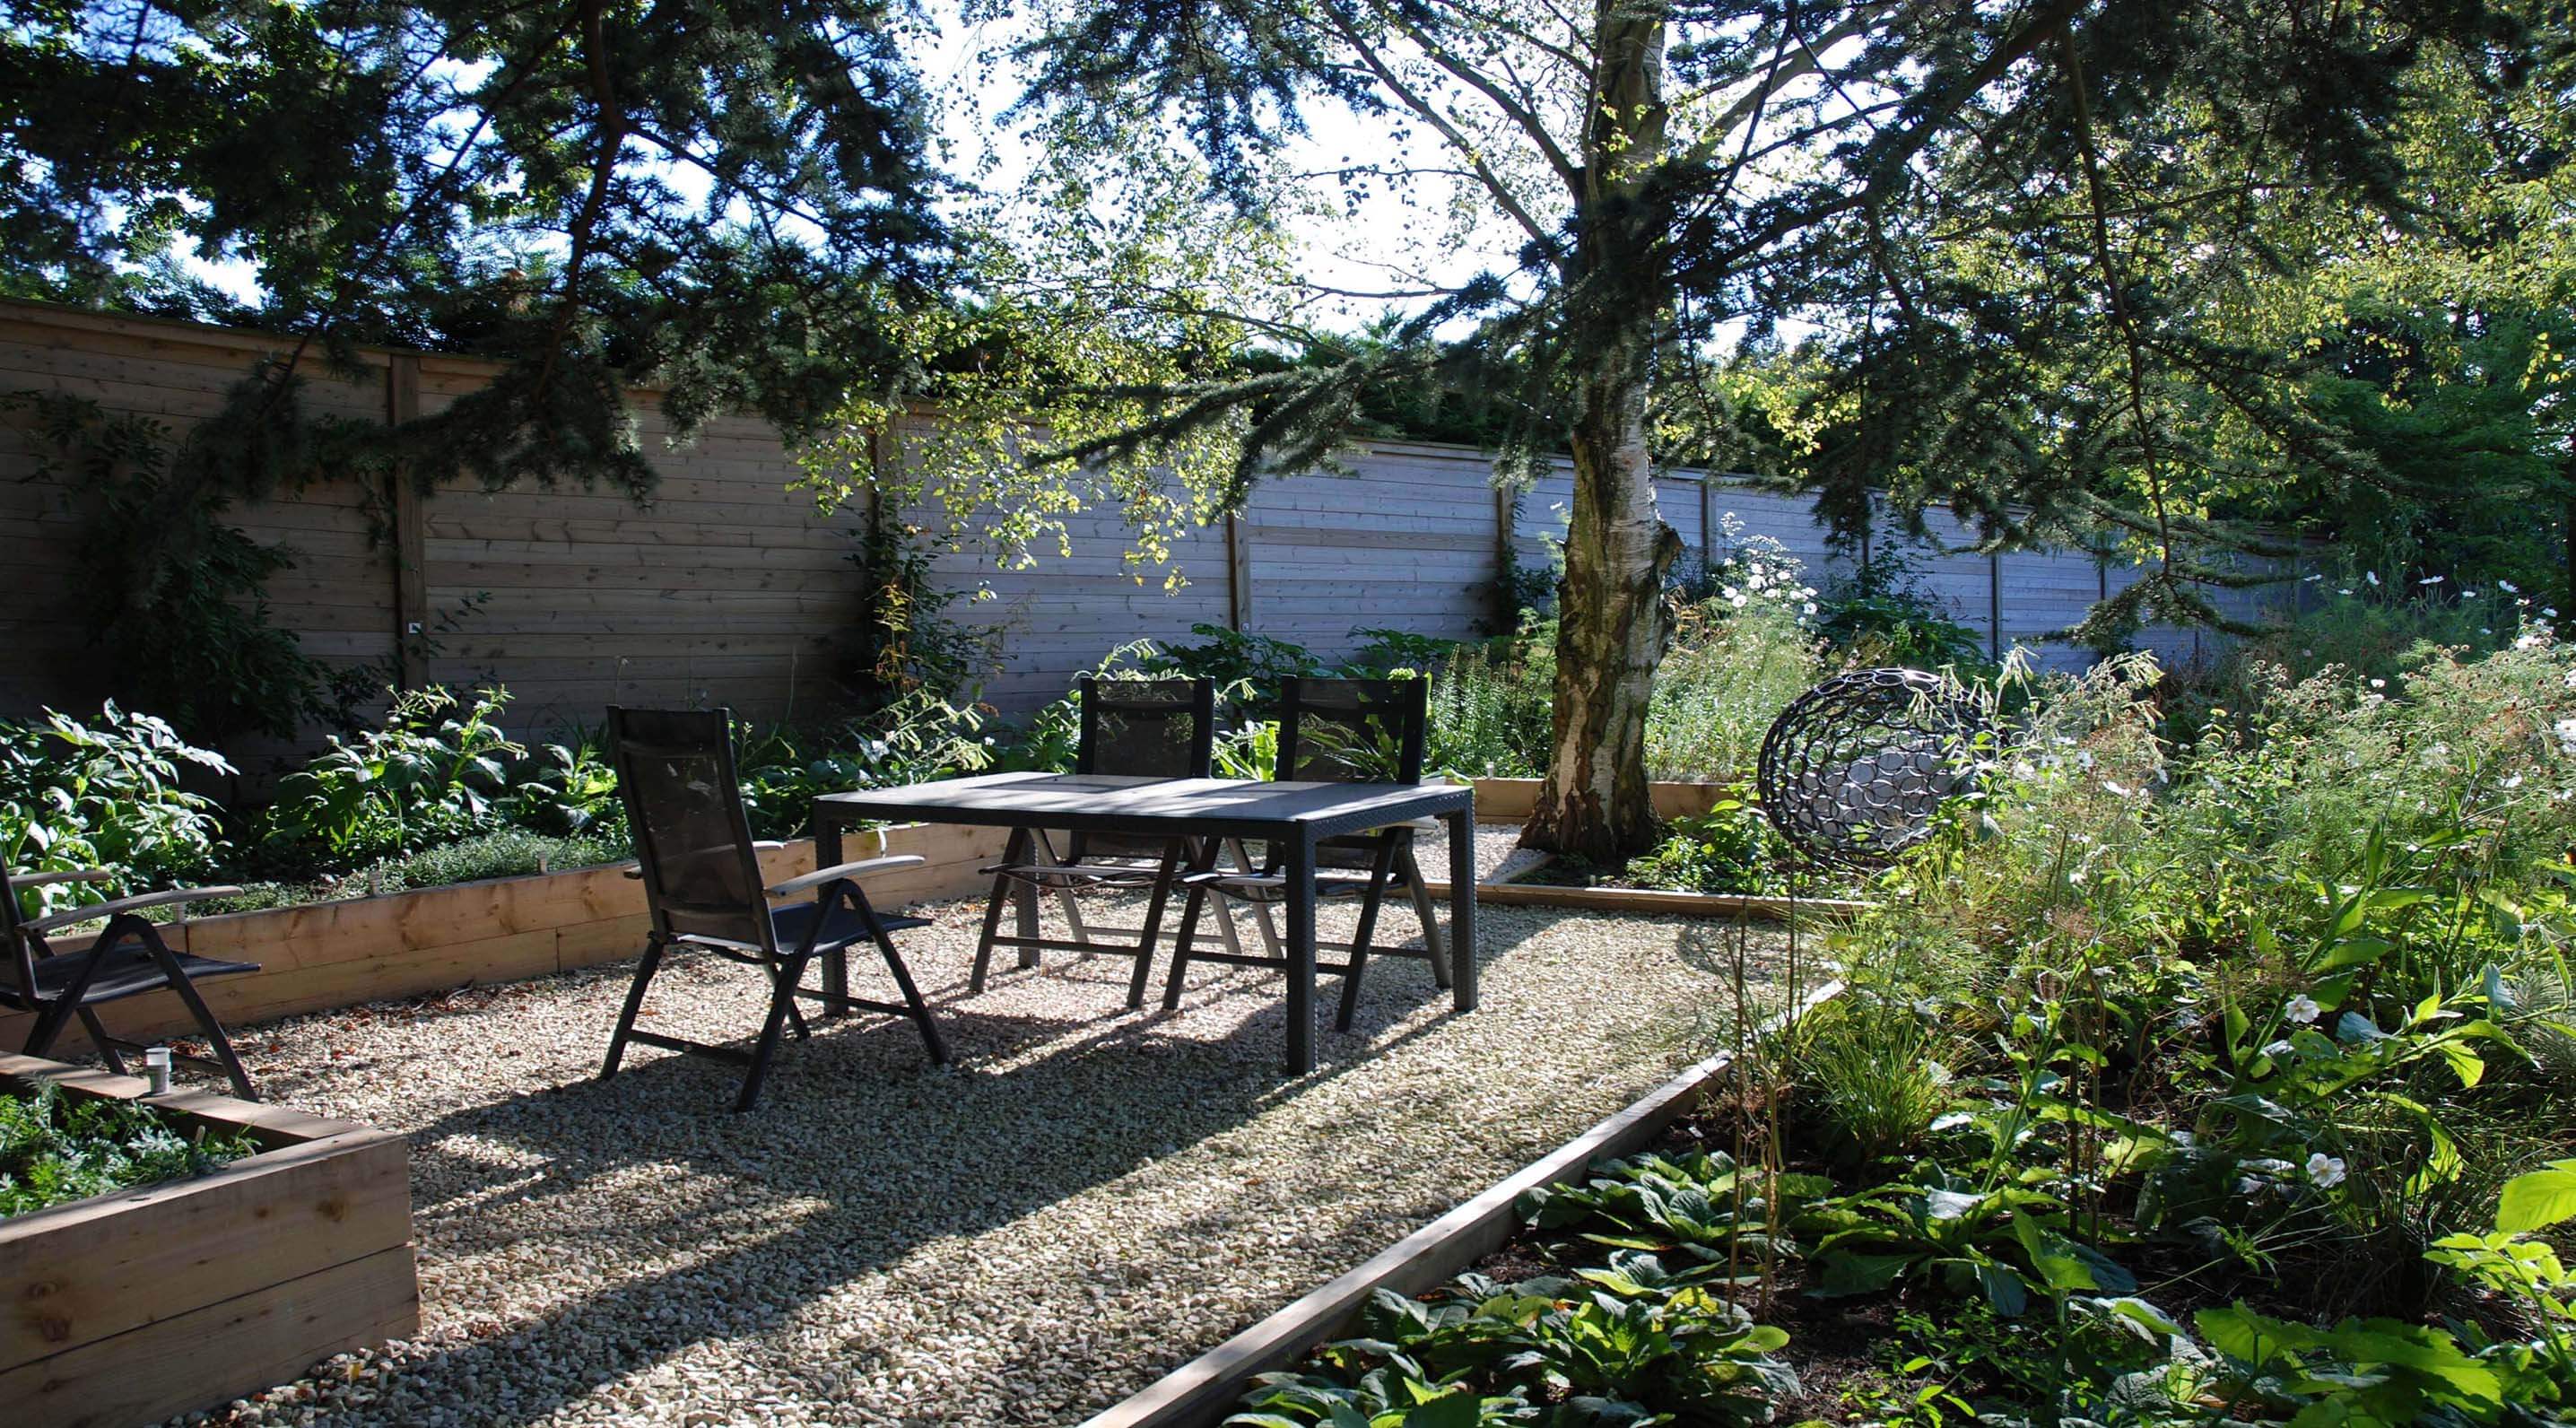 New seating area with Jakoustic fencing panel sleeper garden design